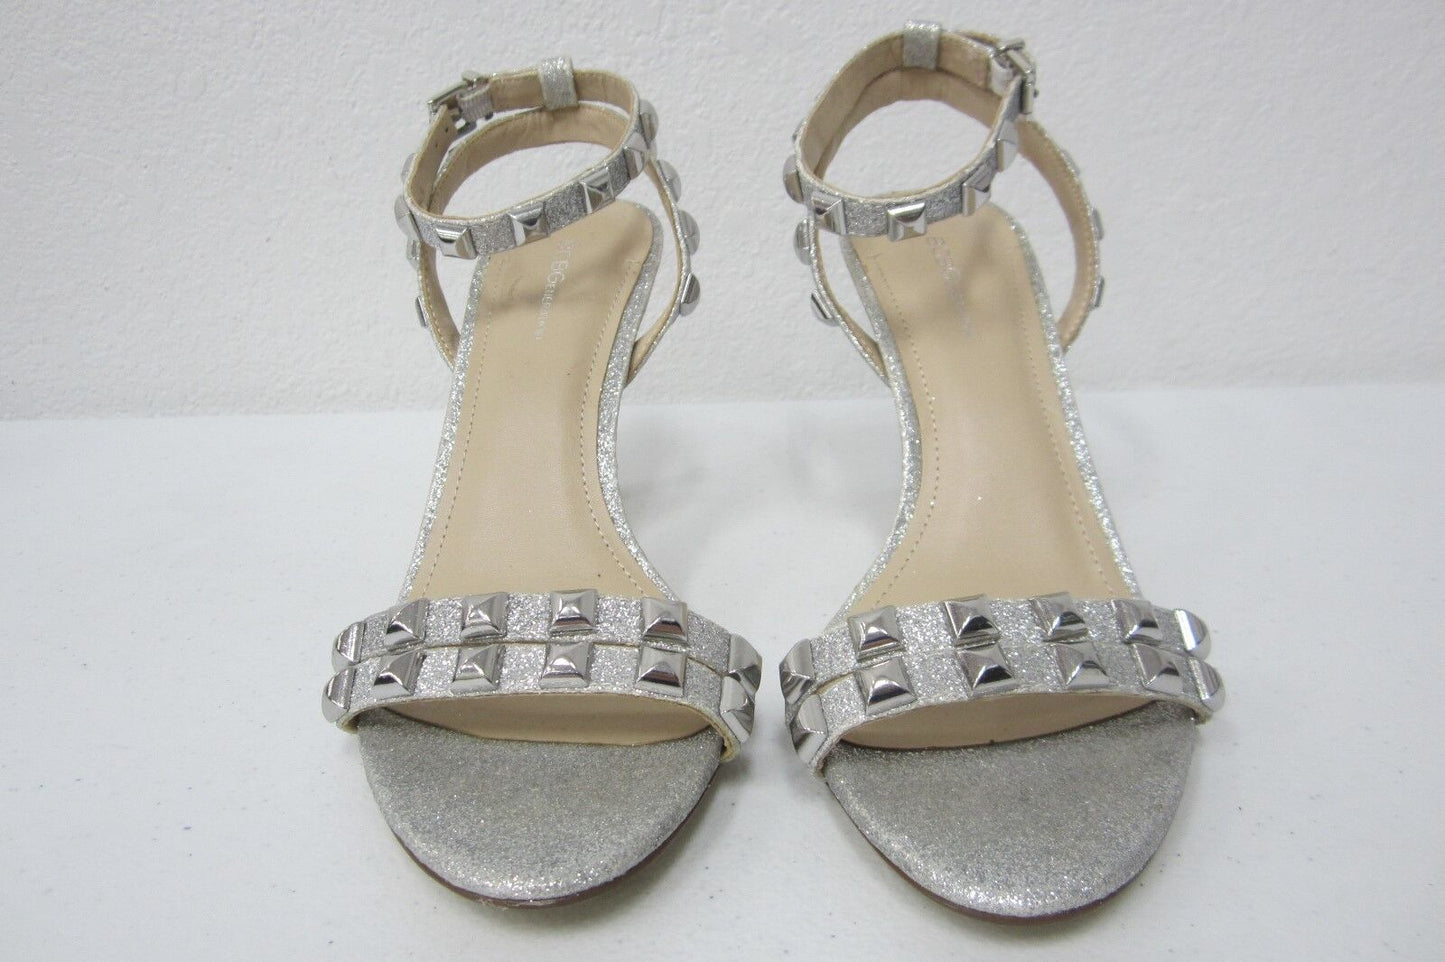 BCBGeneration Dacotah-X Glitter Silver Leather Studded Ankle Strap Heels Size 8M